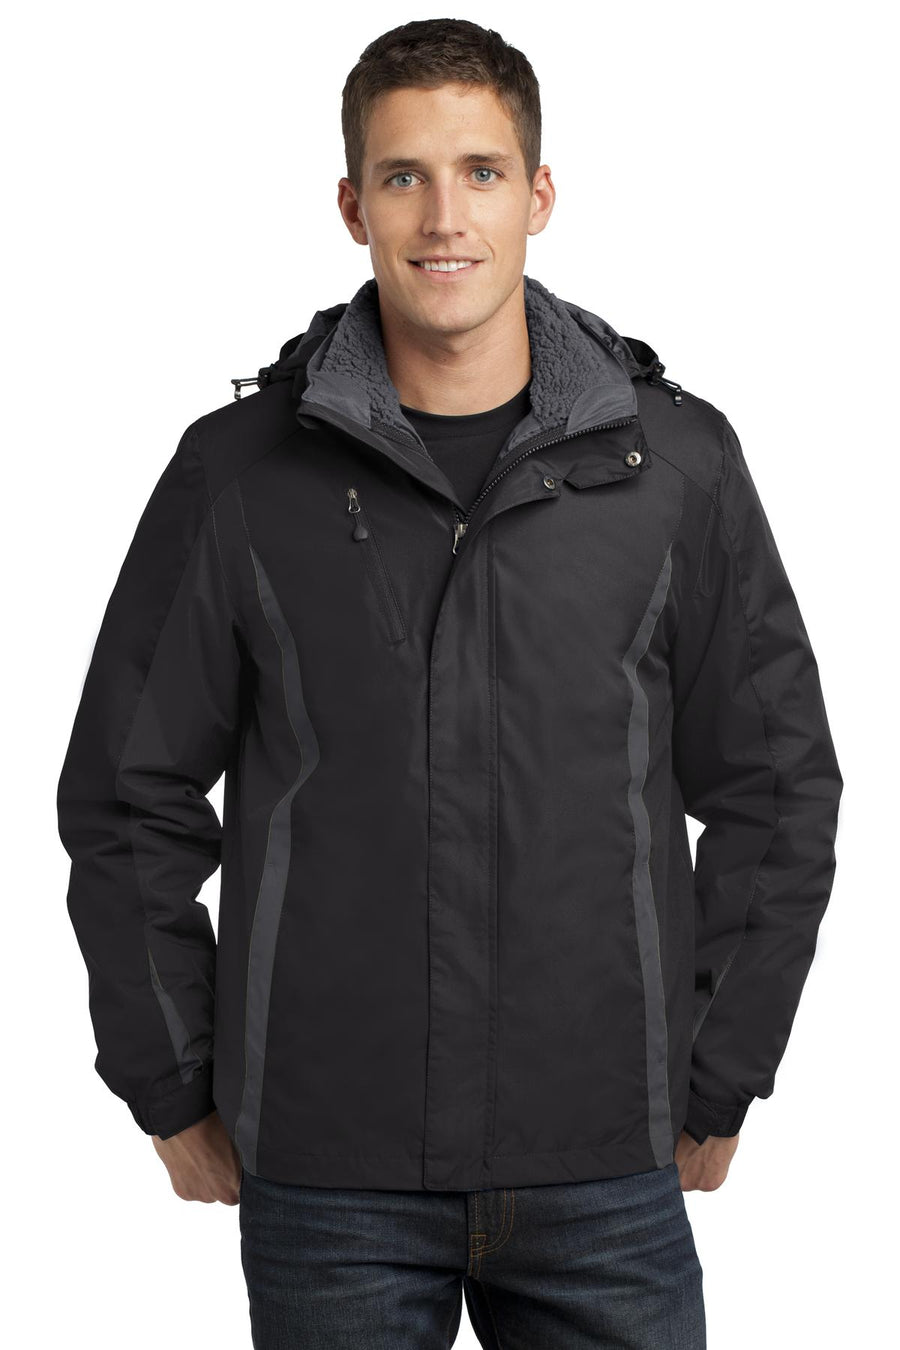 Port Authority Colorblock 3-in-1 Jacket.